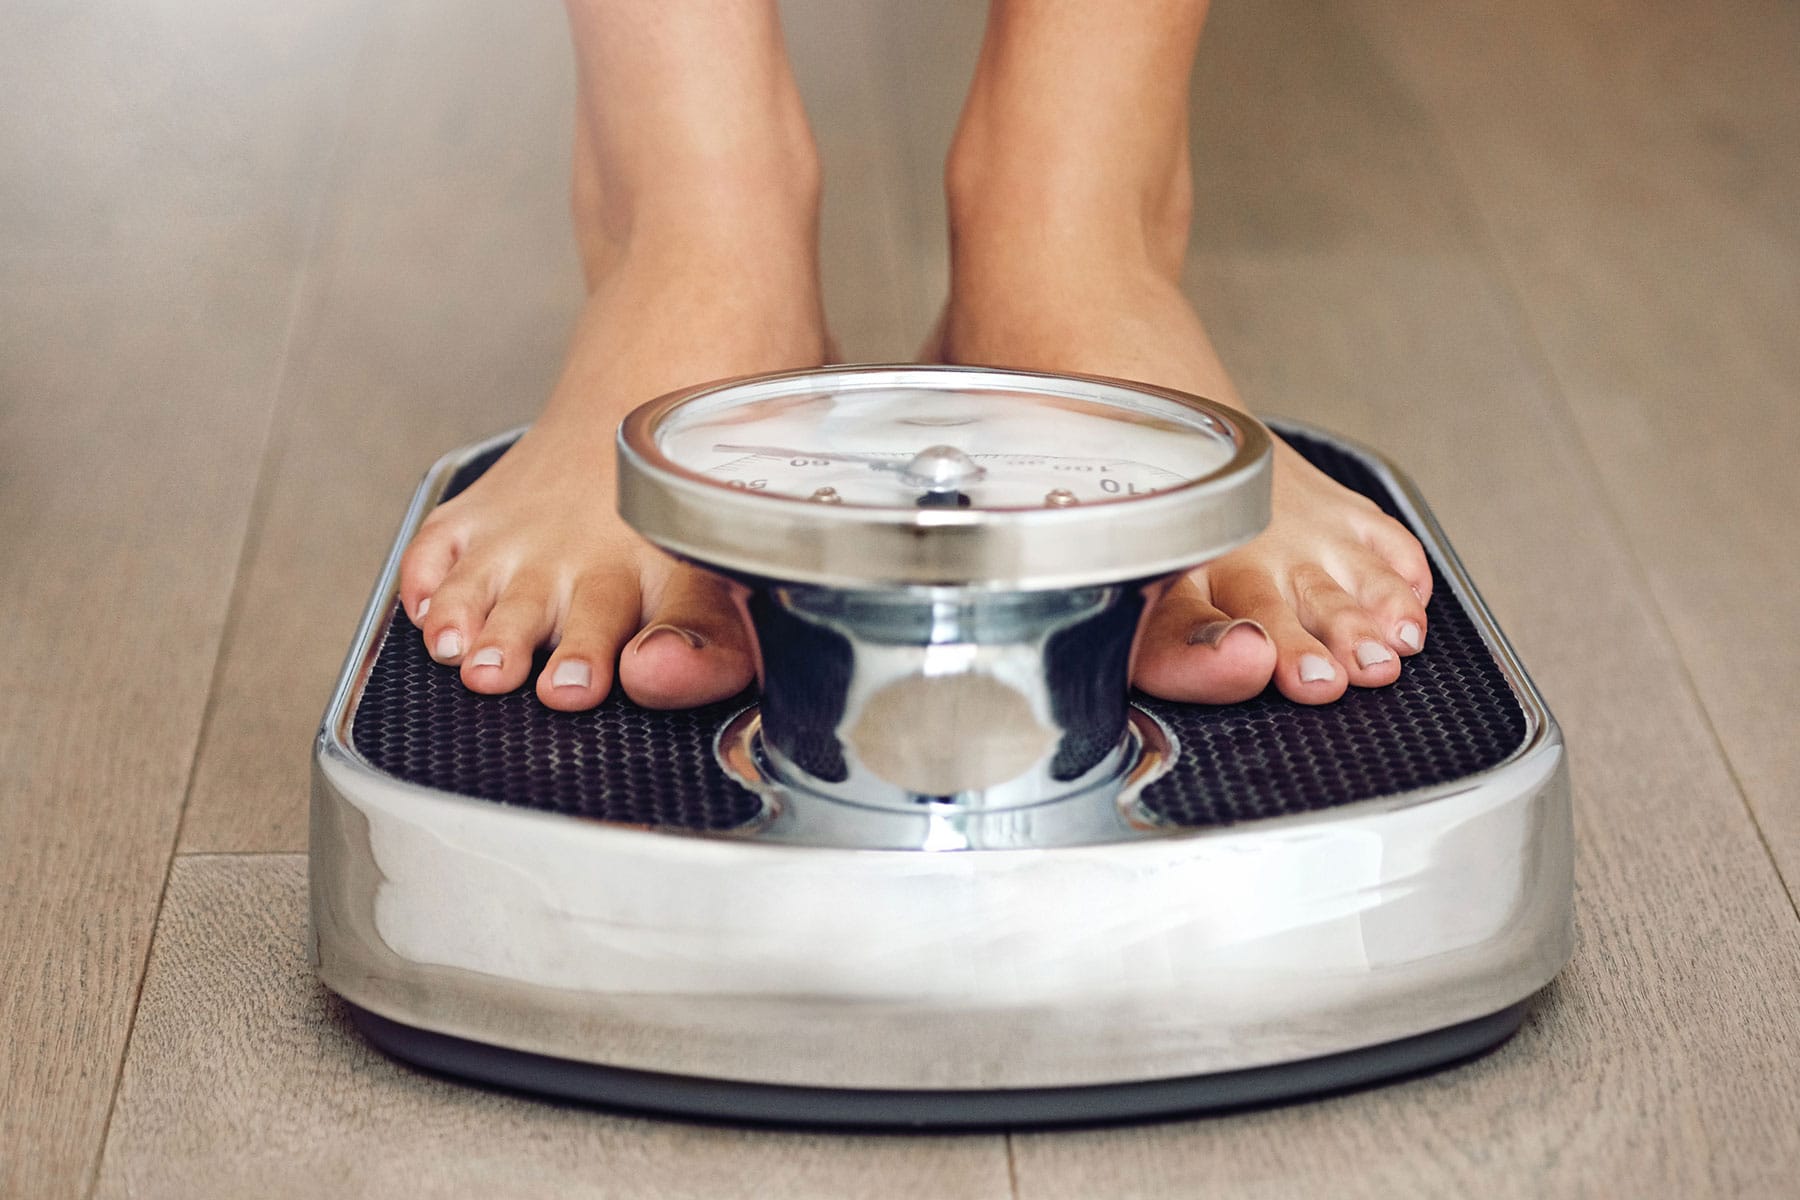 A person checking weight on a weighing scale.